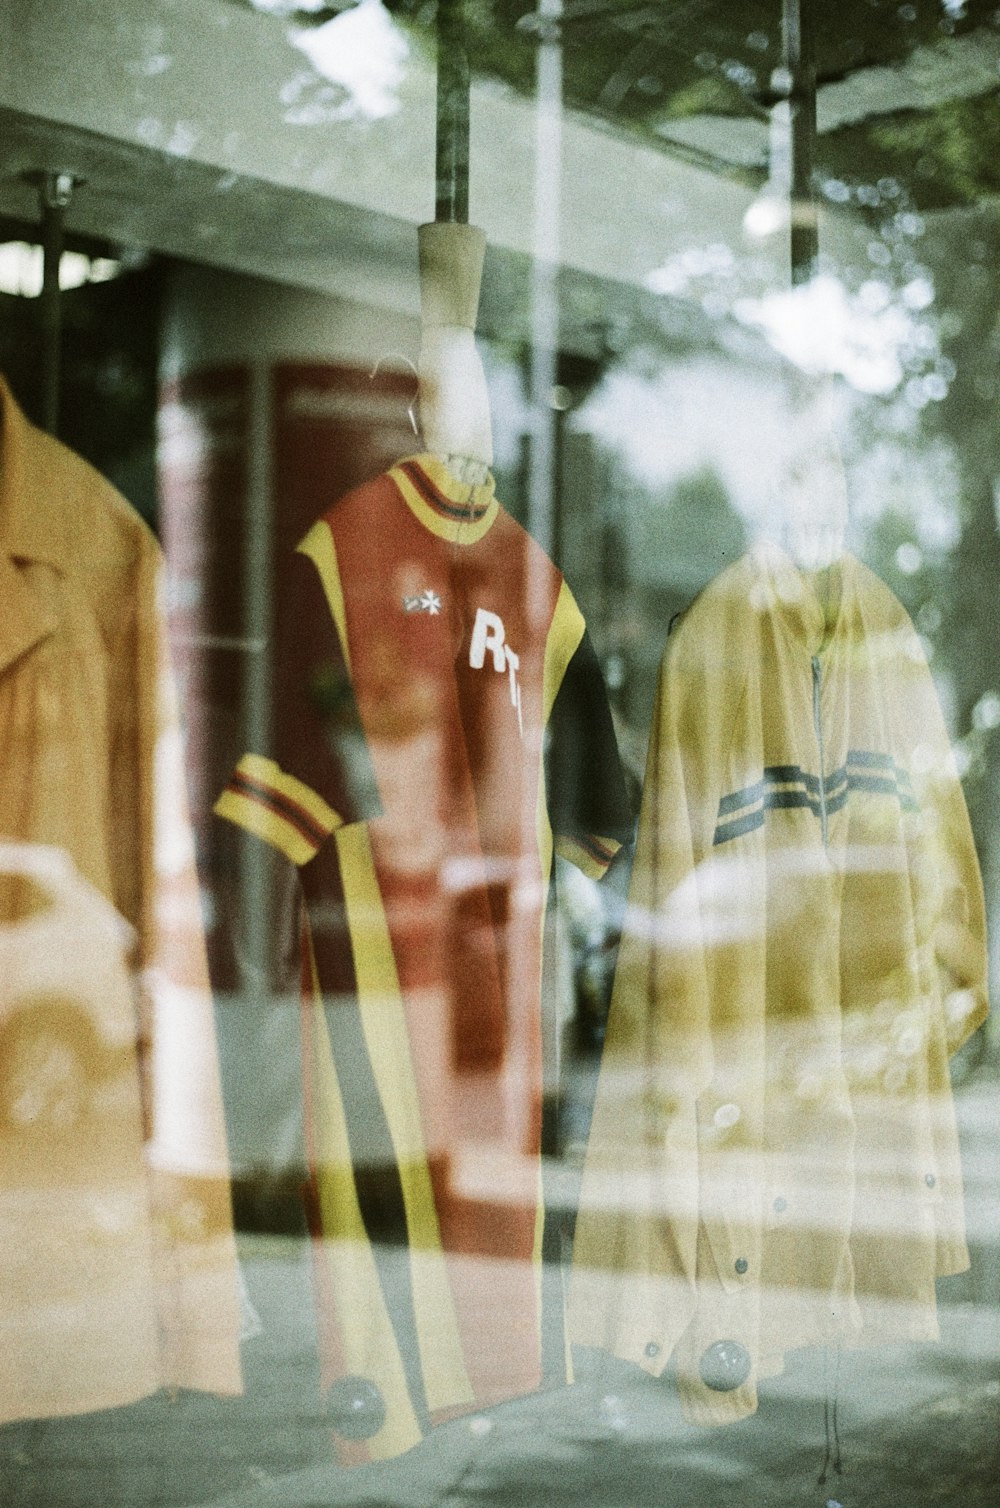 two mannequins dressed in yellow and red in a window